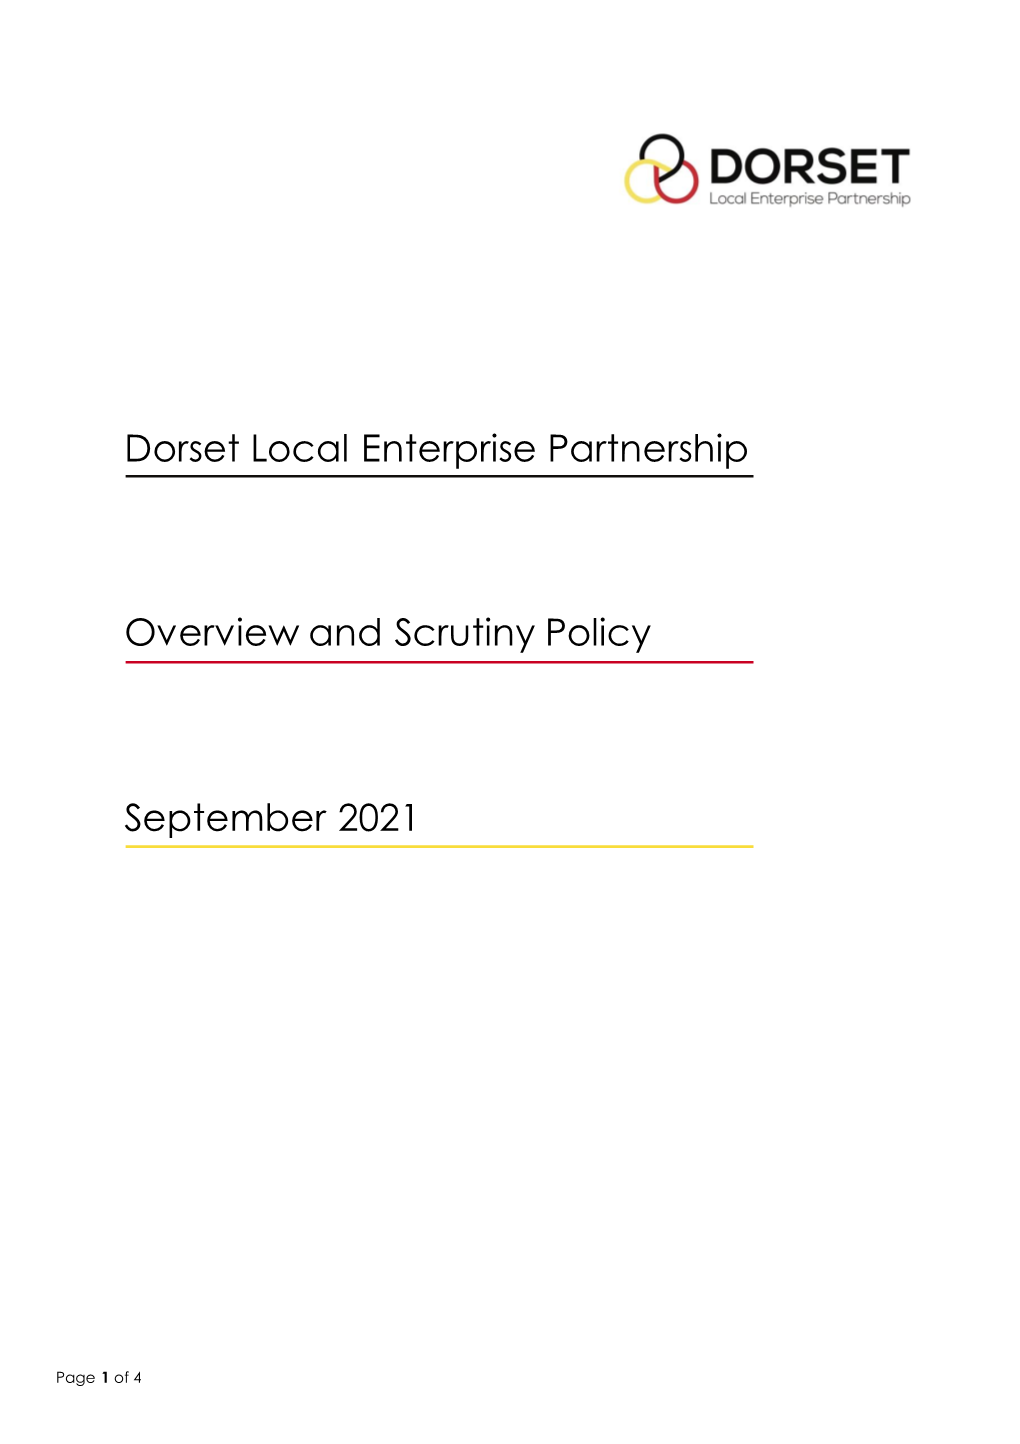 Dorset Local Enterprise Partnership Overview and Scrutiny Policy September 2021